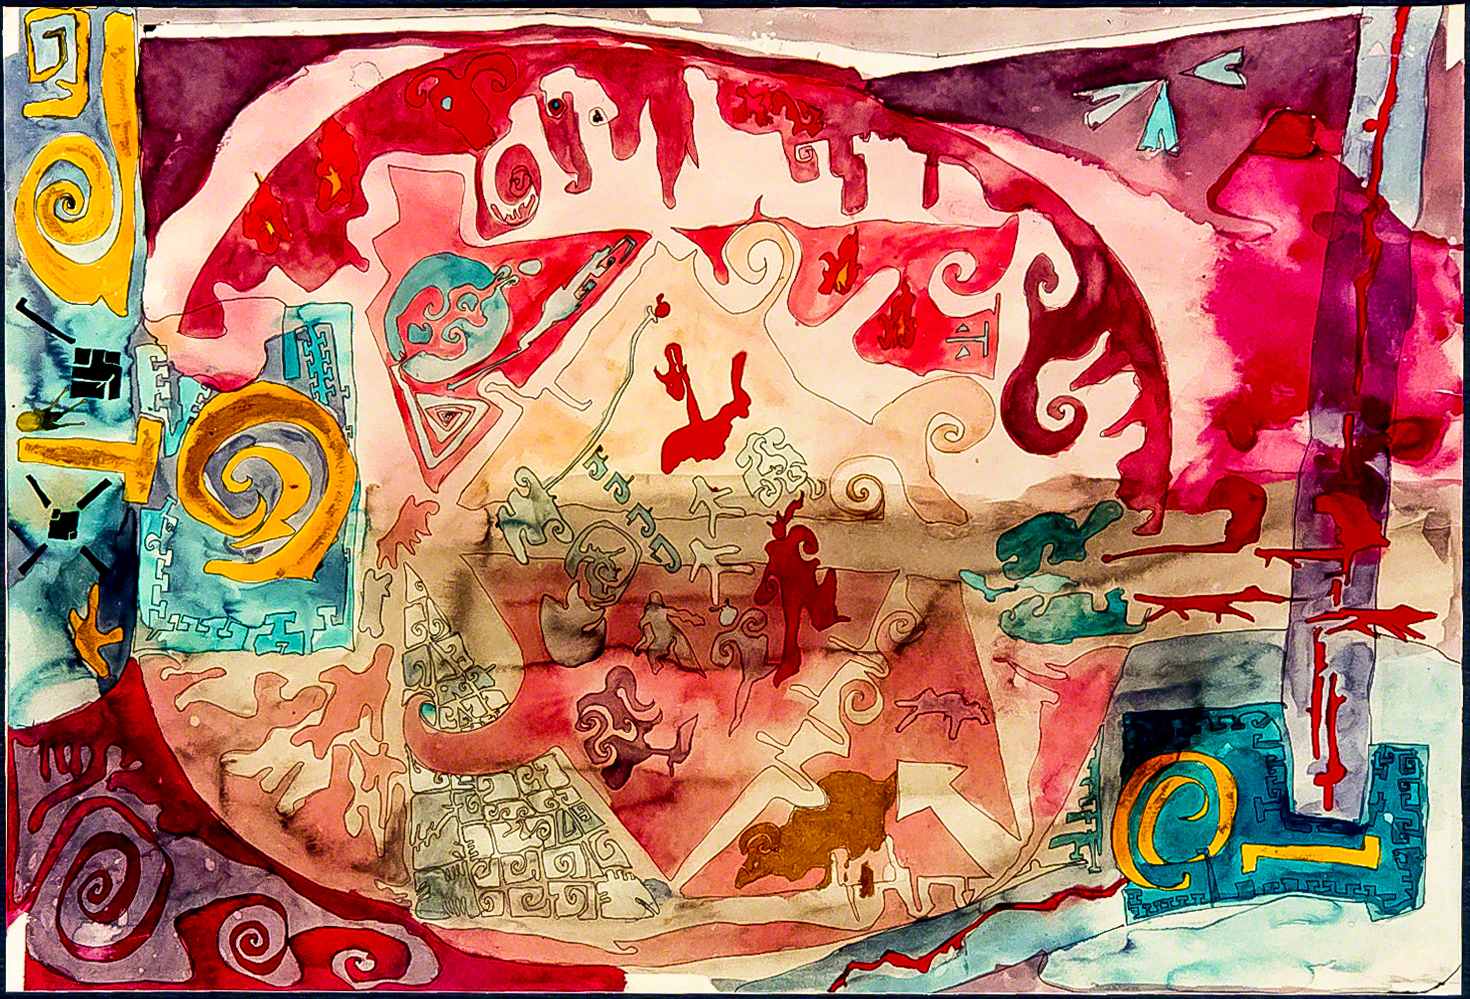 Gods In Chaos - color ink on paper, 64 x 44 cm, 1997.